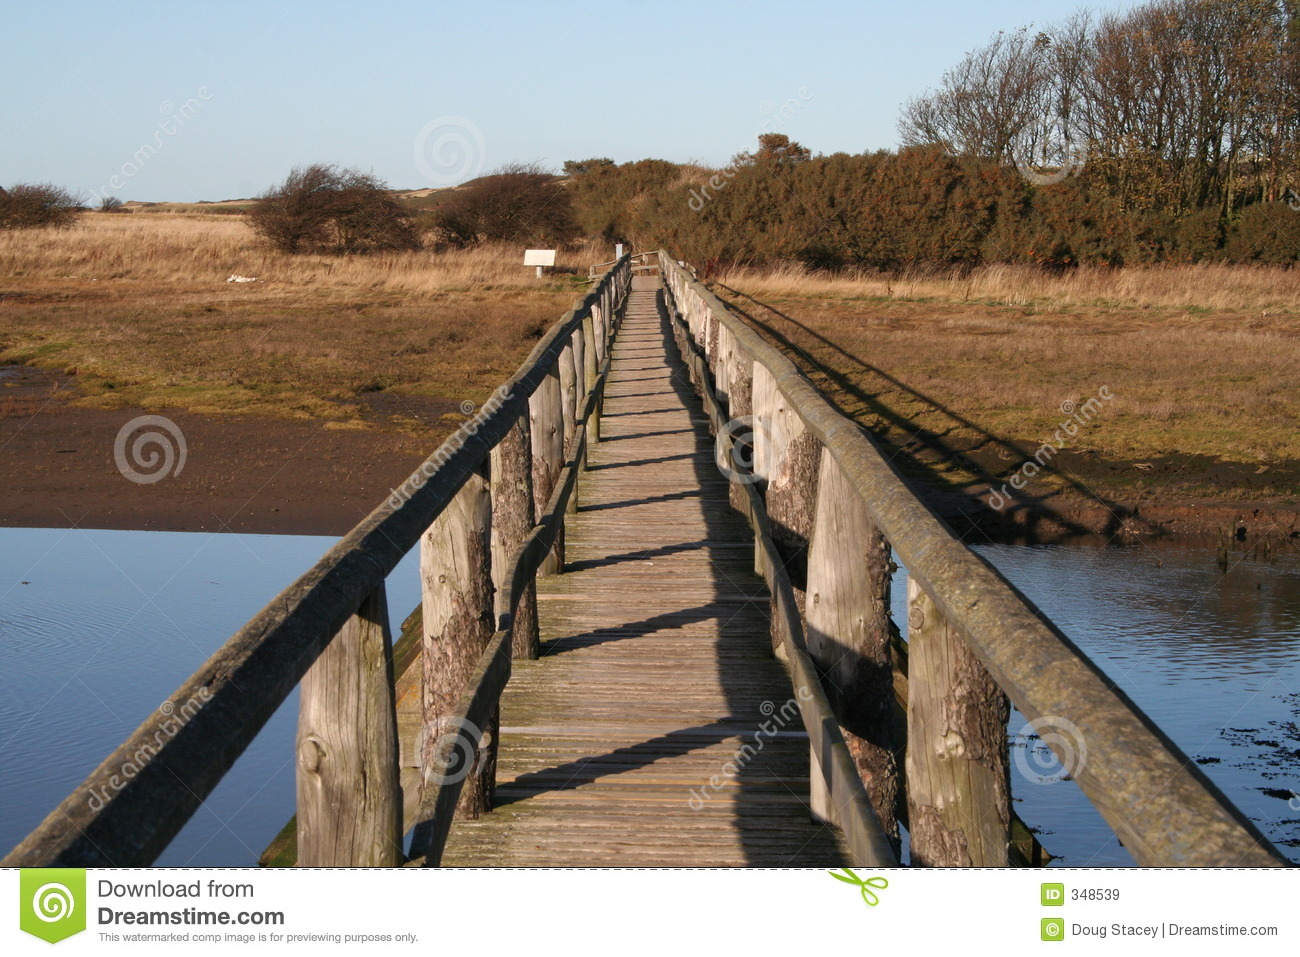 Bridge Over Water Royalty Free Stock Images   Image  348539